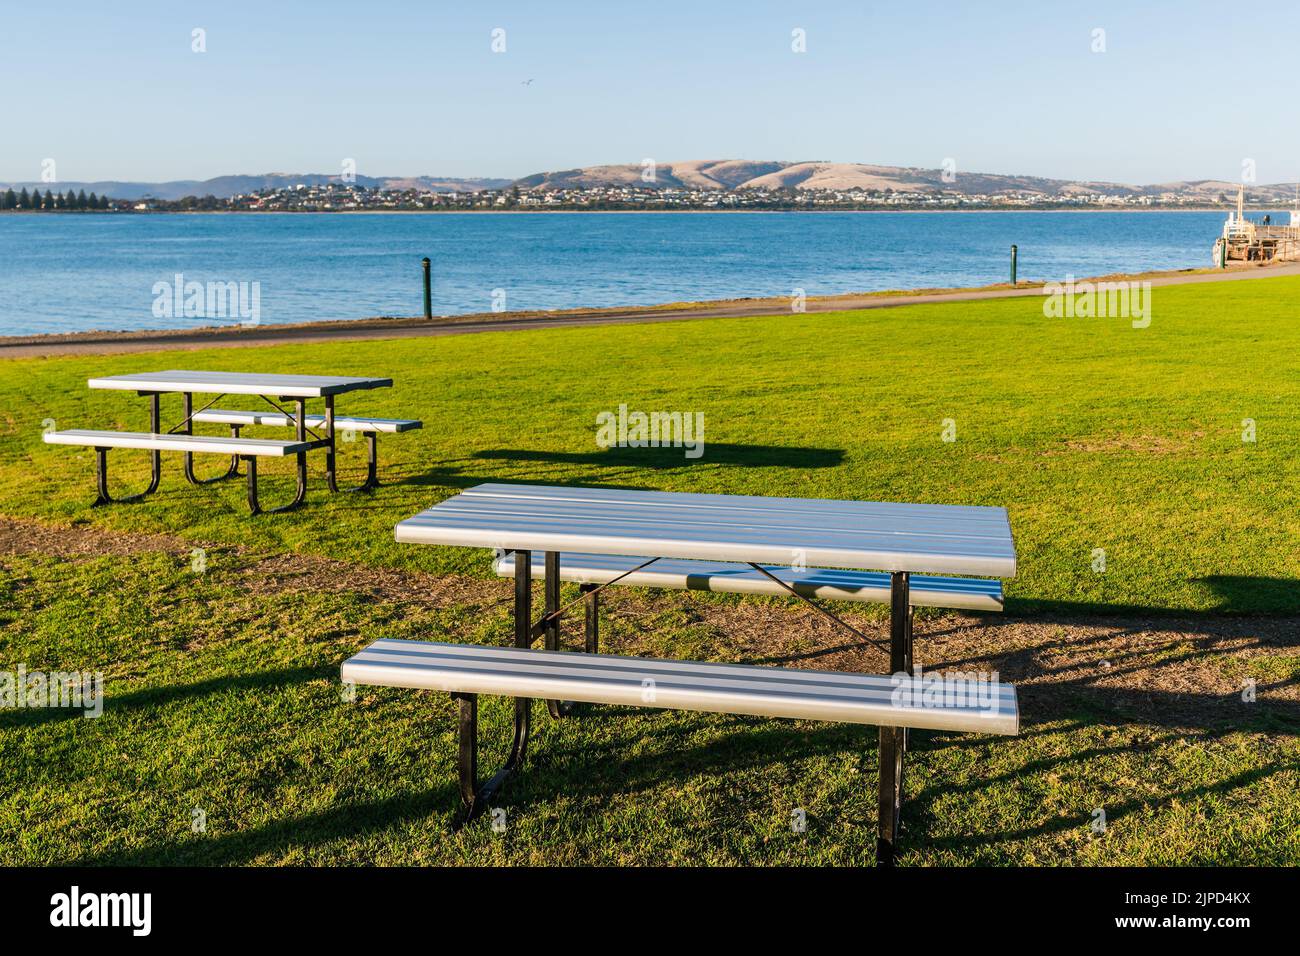 Picnic tables with a view on Granite Island seashore at sunset, South Australia Stock Photo